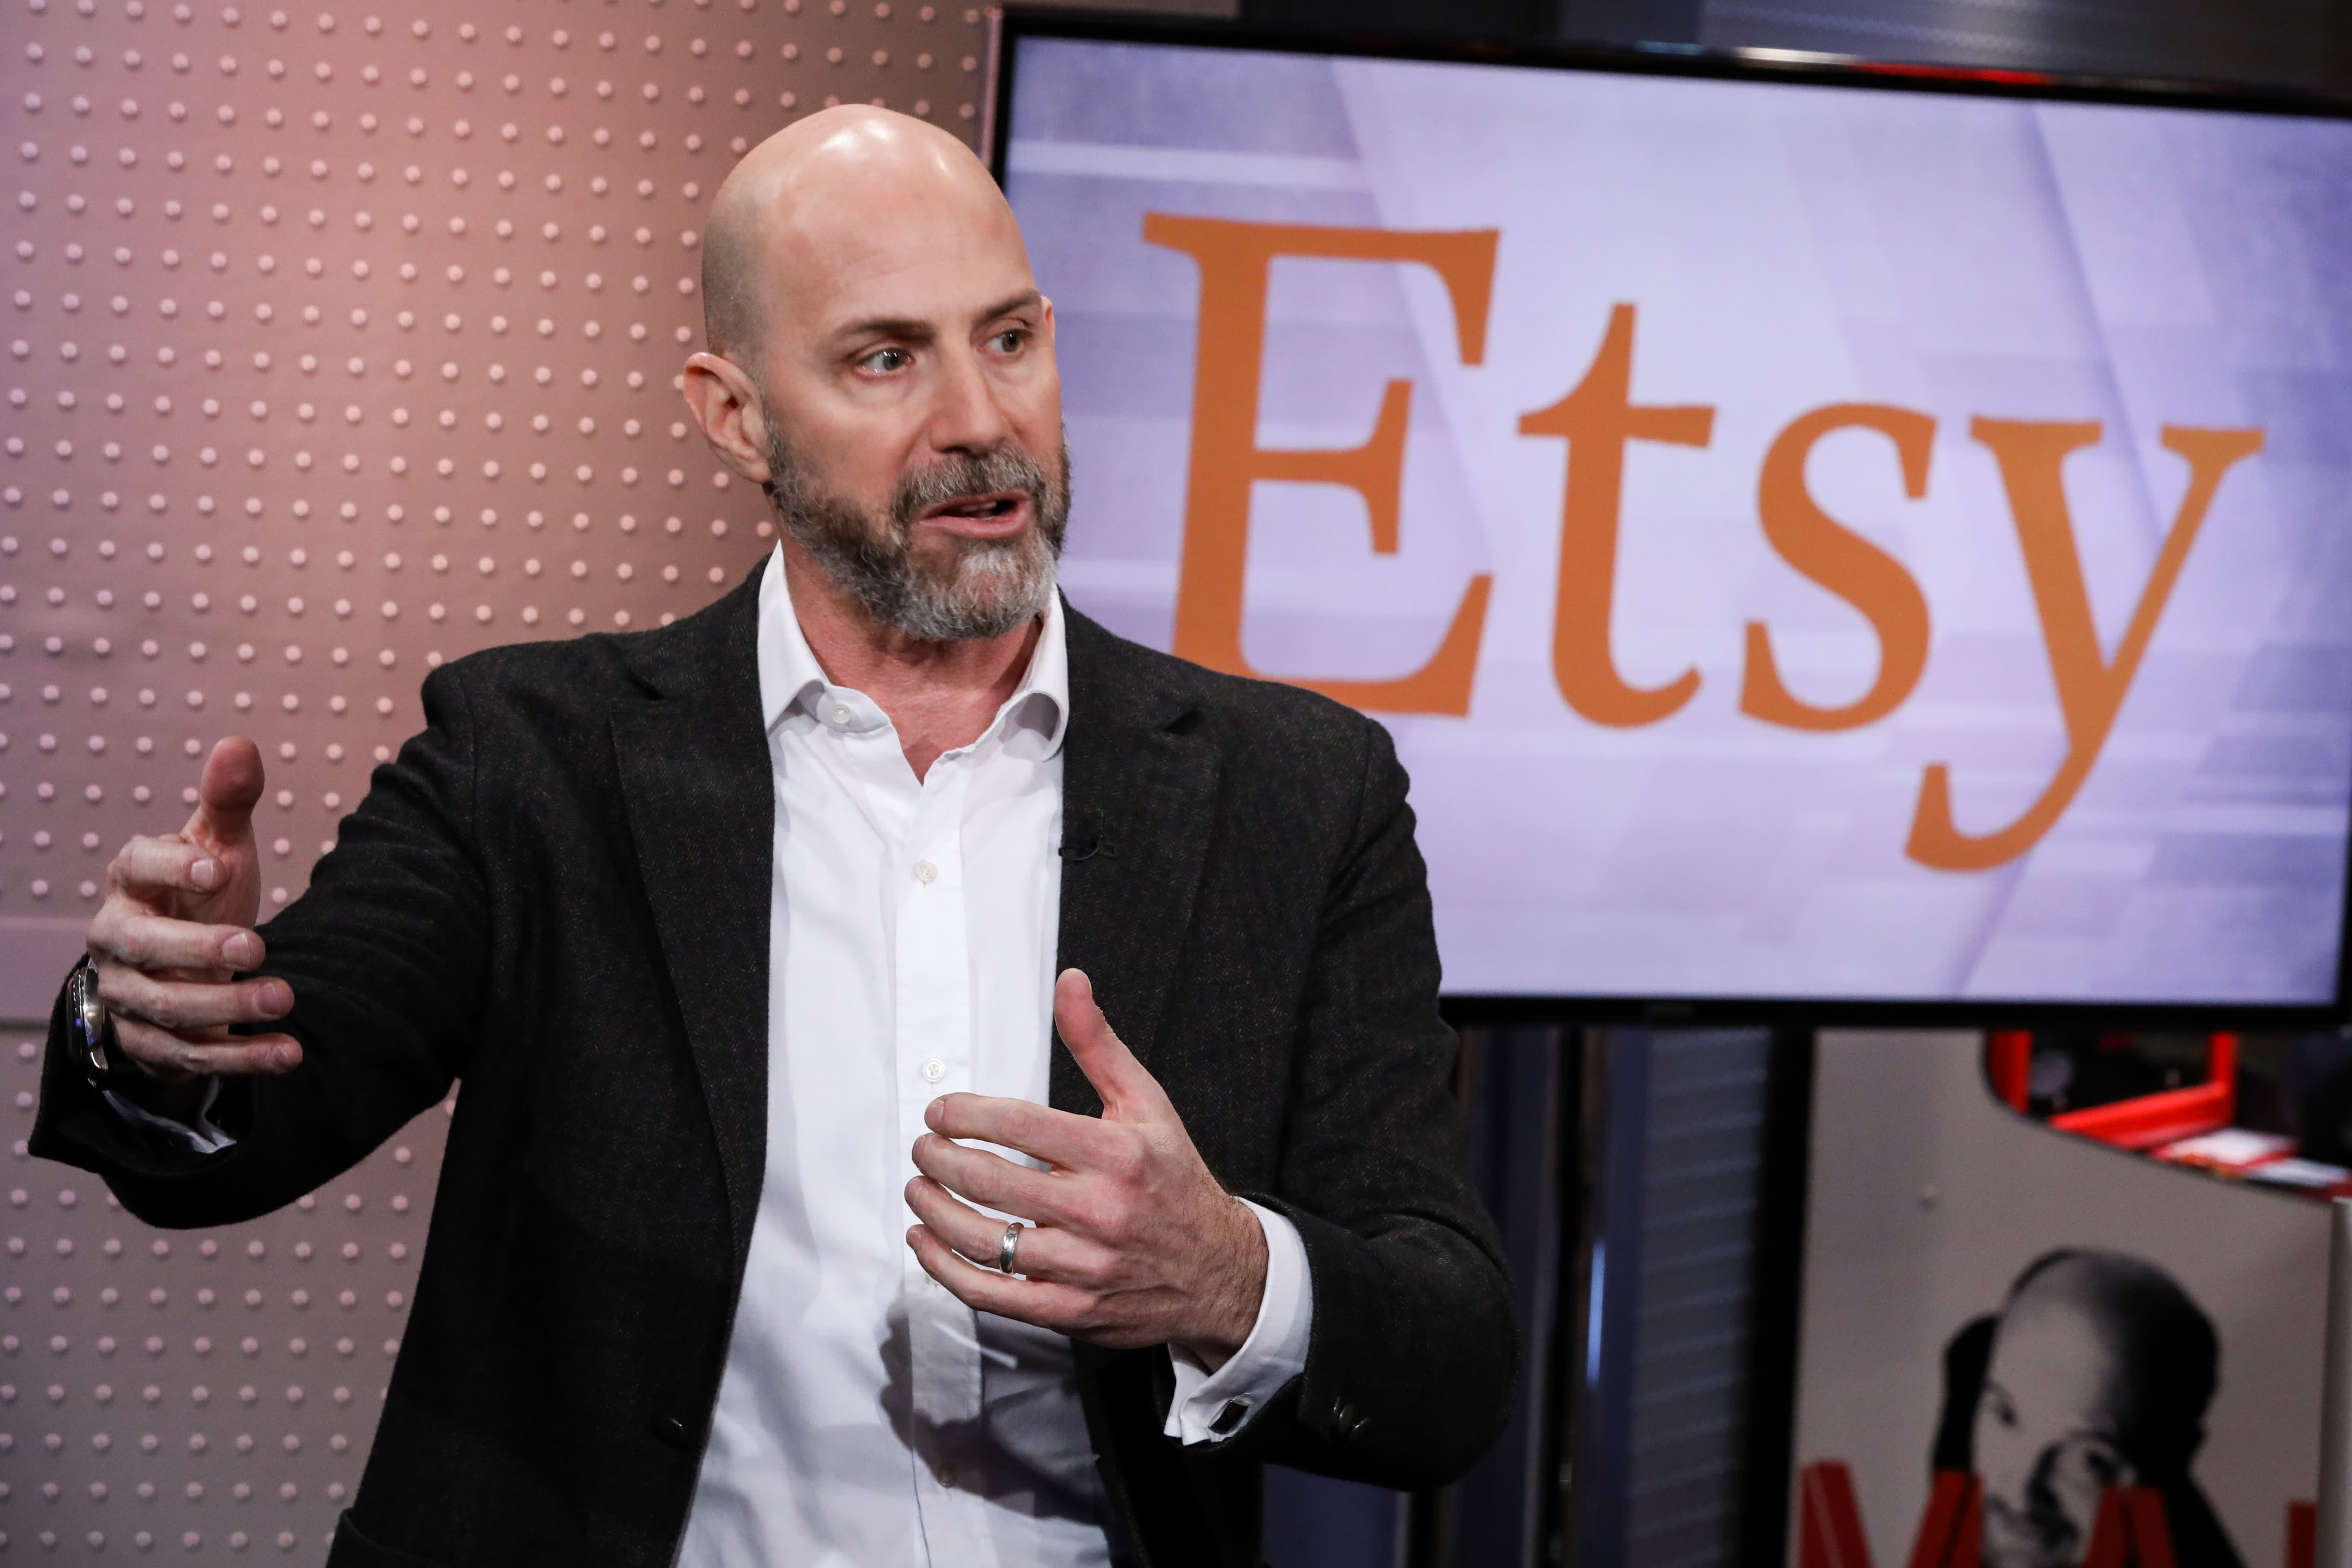 Etsy shares soar after fourth-quarter earnings beat